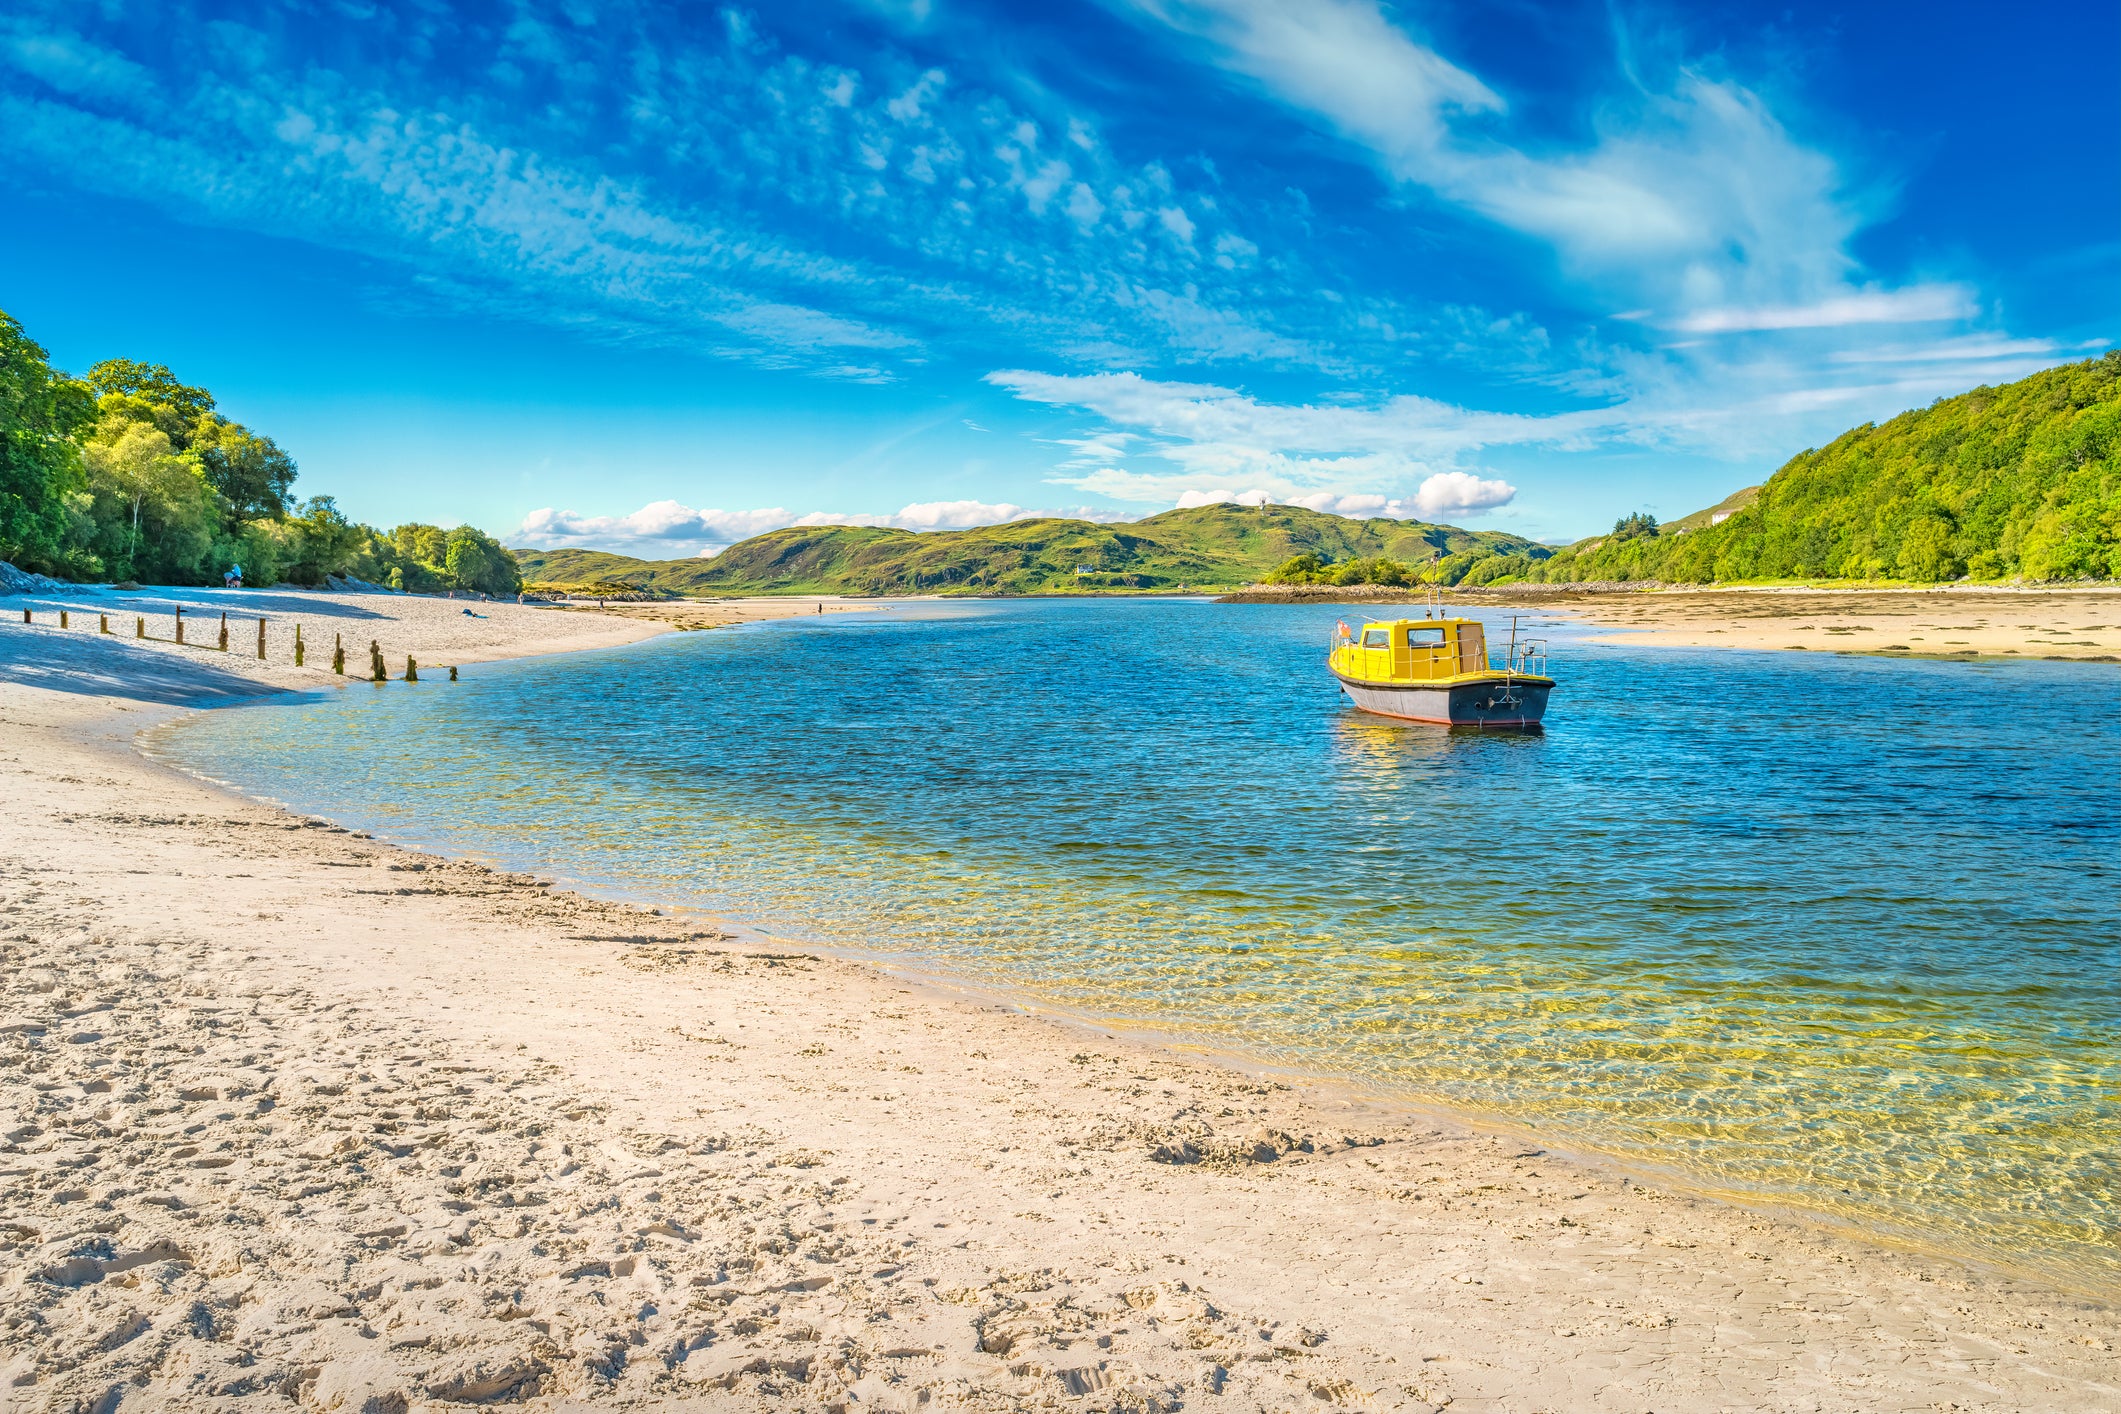 Top spots include Loch Morar in the Scottish Highlands, which is the deepest freshwater lake in Britain